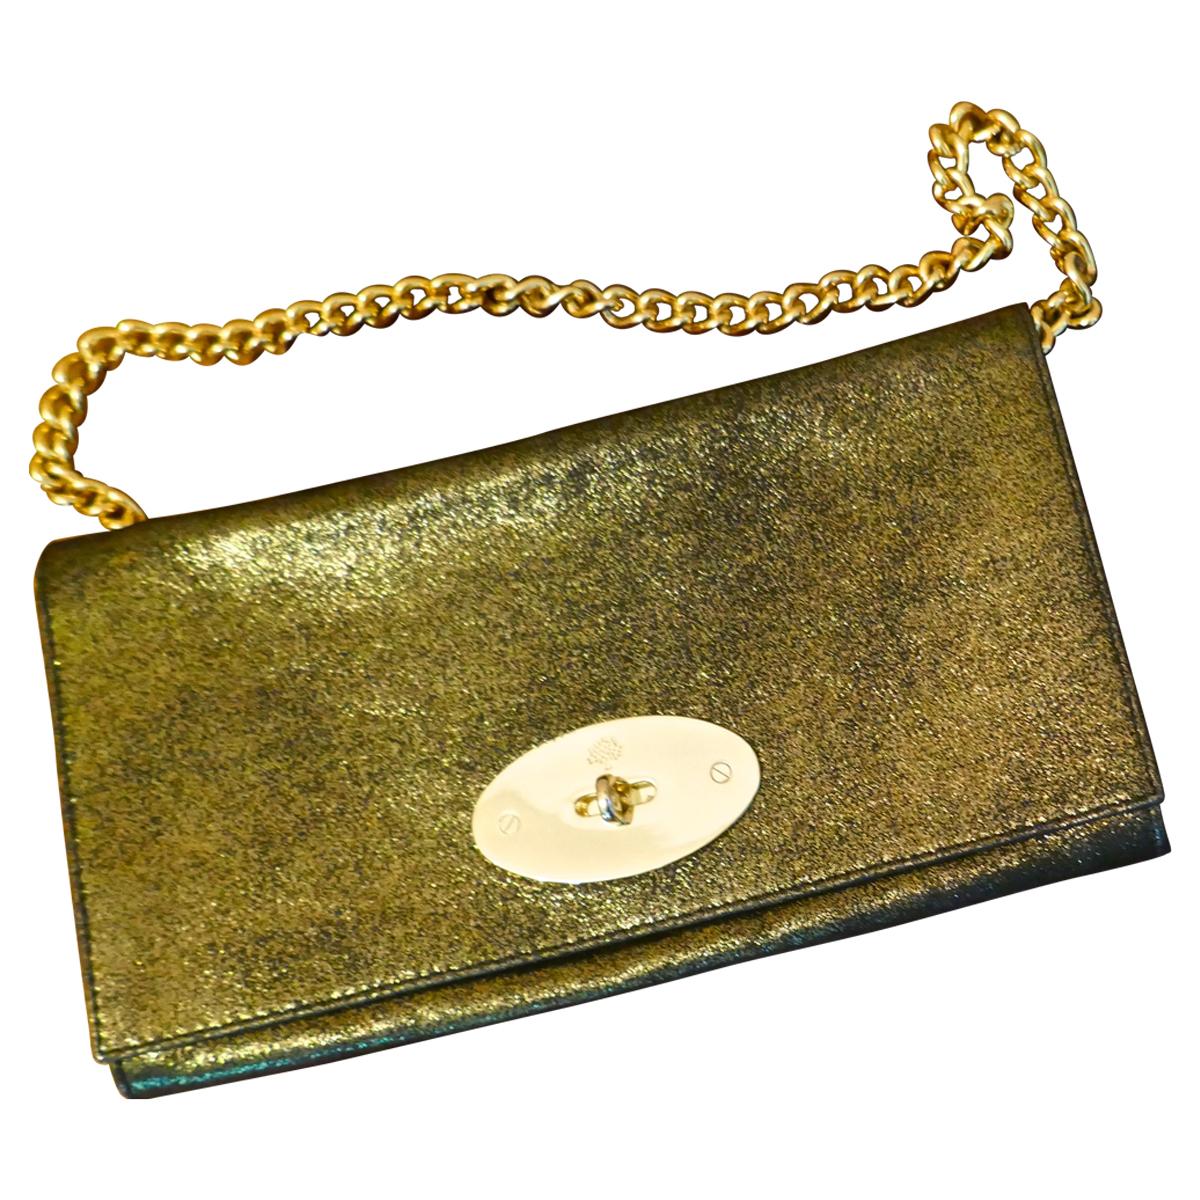 Gold Mulberry Evening Clutch or Chain Handle Bag